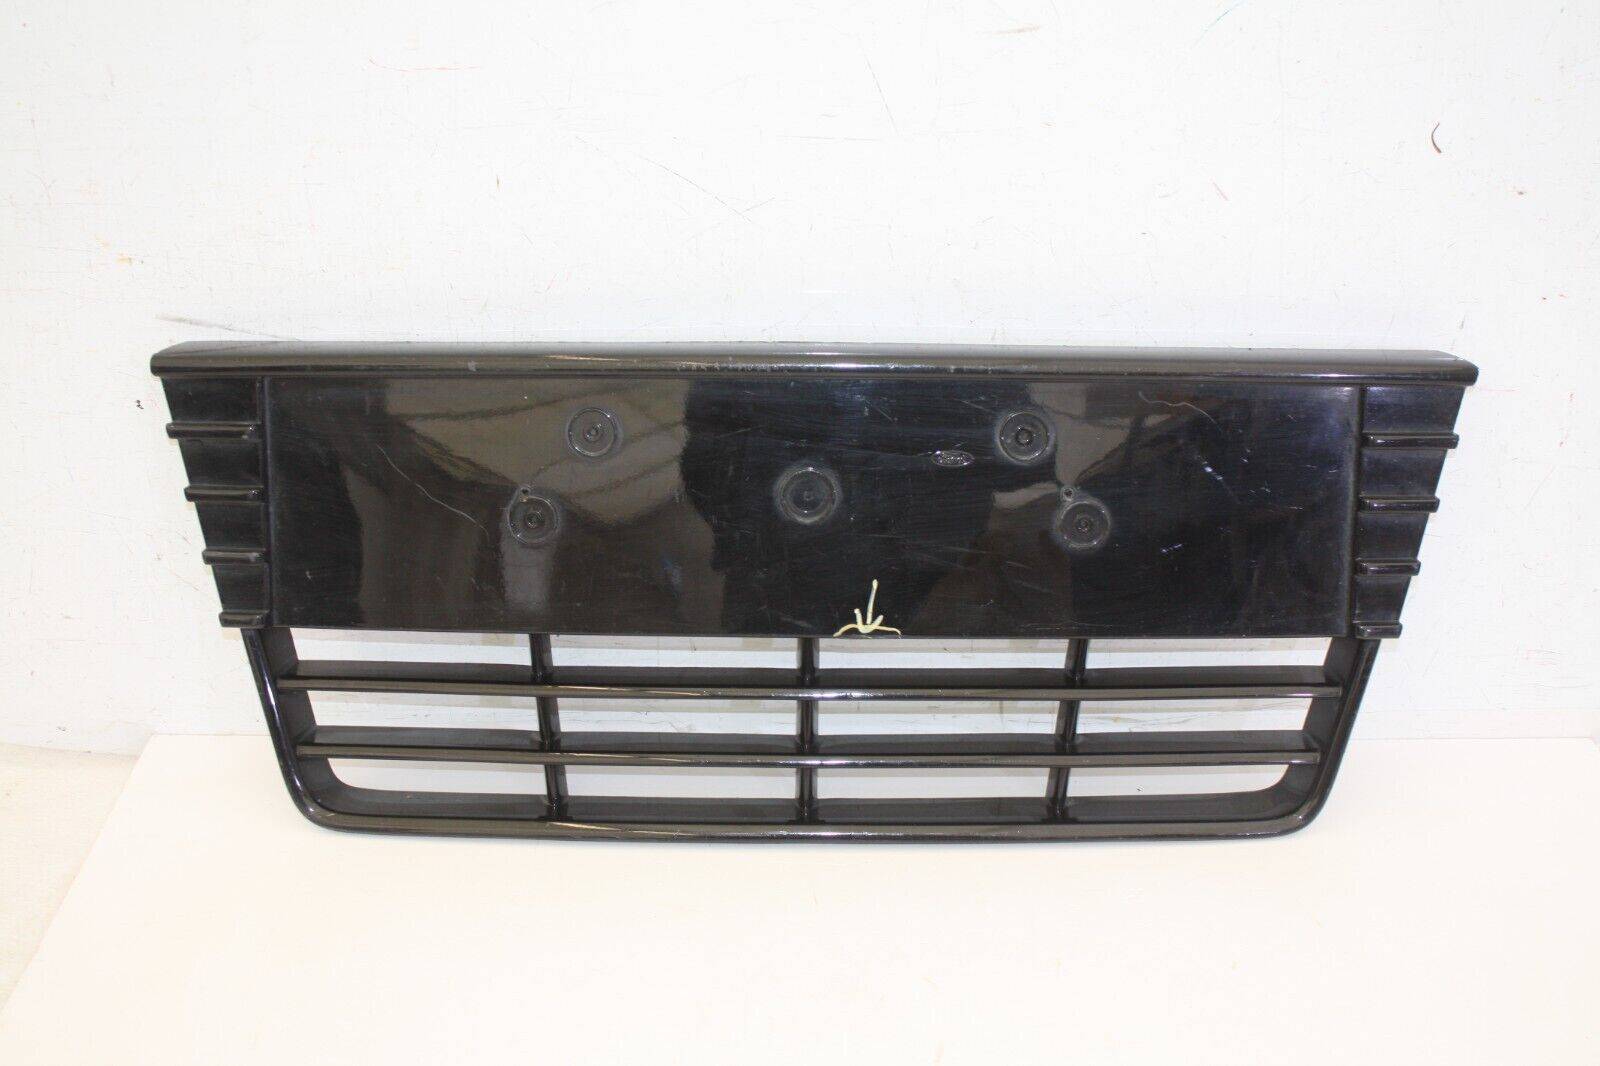 Ford Focus Front Bumper Grill 2011 TO 2014 BM51 17K945 E Genuine SEE PICS 176238481574